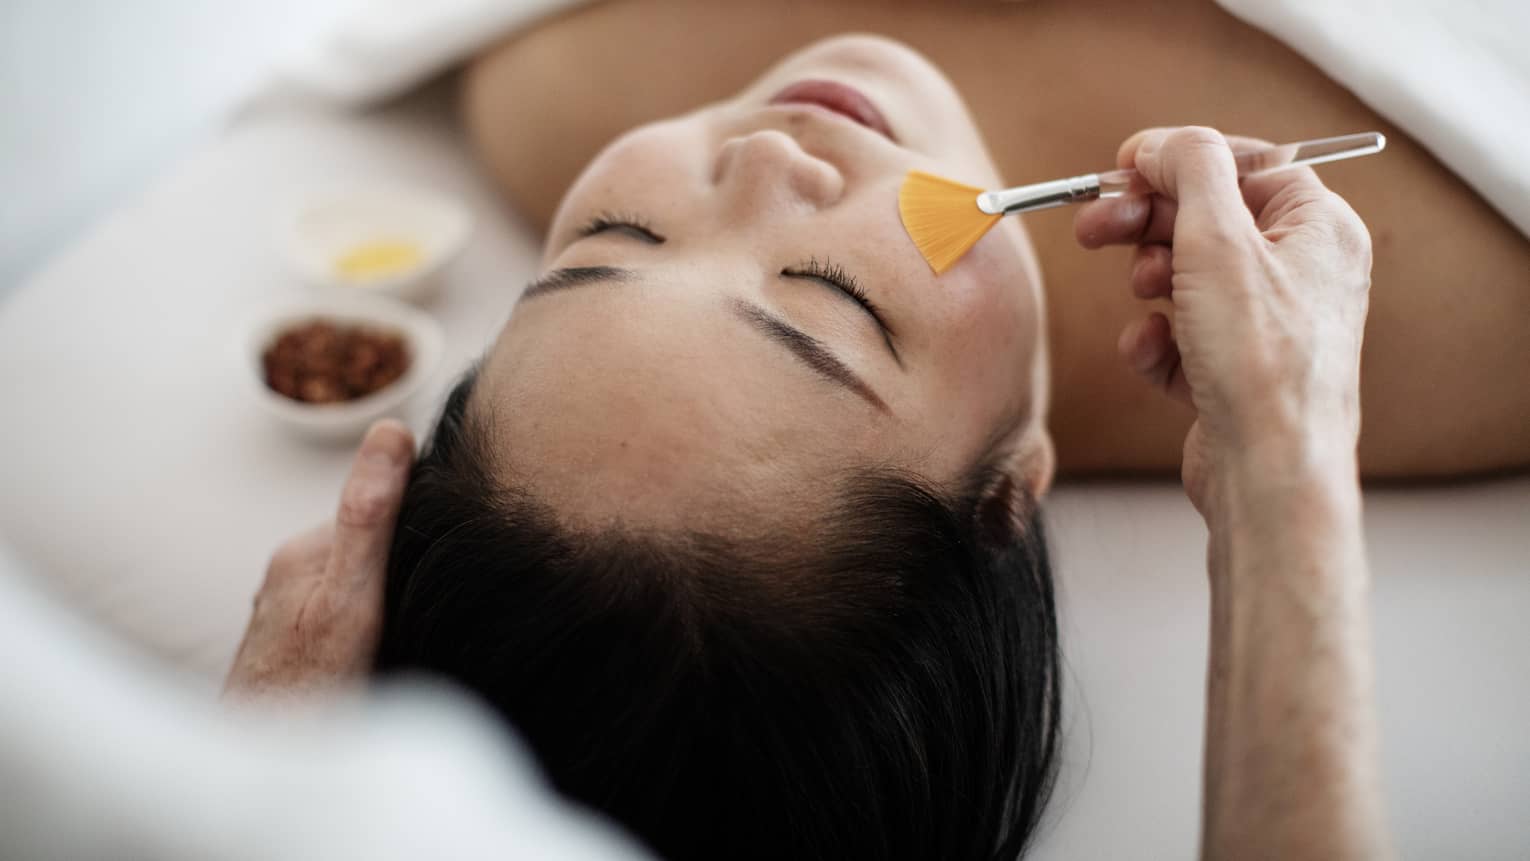 A woman receiving a spa treatment utilizing a brush on her face.